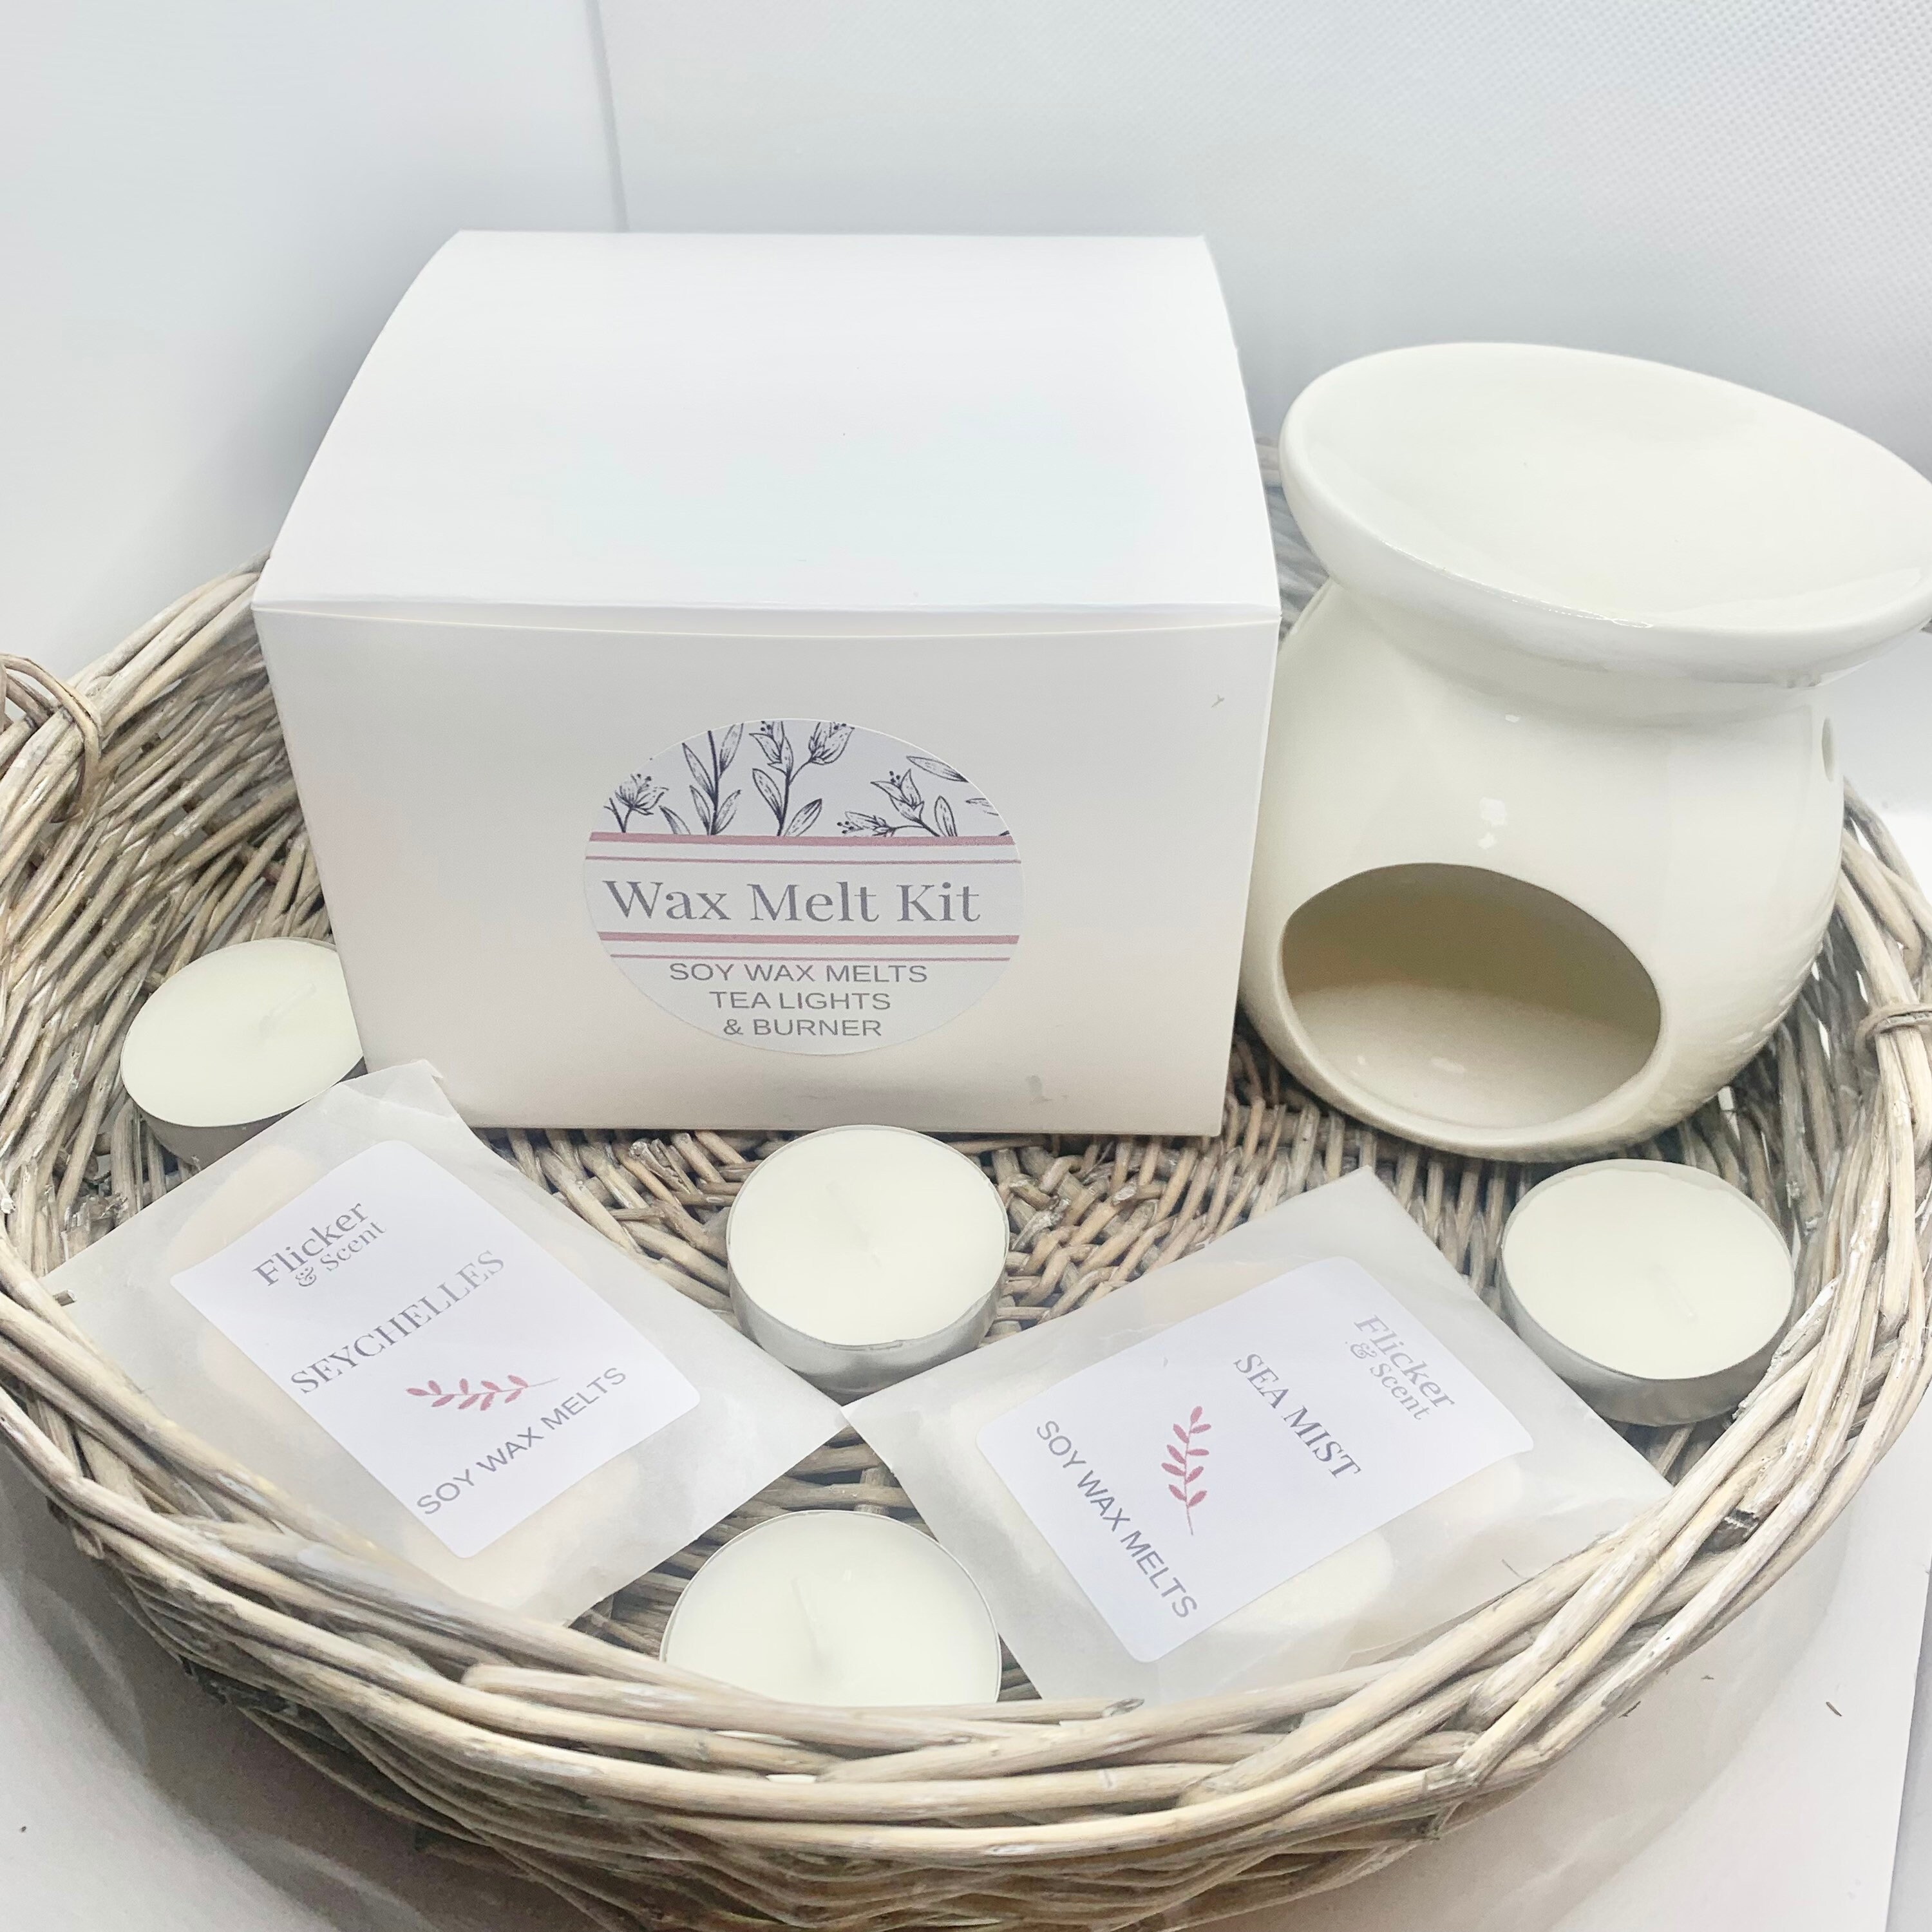 Dog Friendly Wax Melt Starter Set, Natural Wax Melts, Christmas Gift Idea,  Hand Made in the UK, Natural Tealights, Made With Essential Oil 